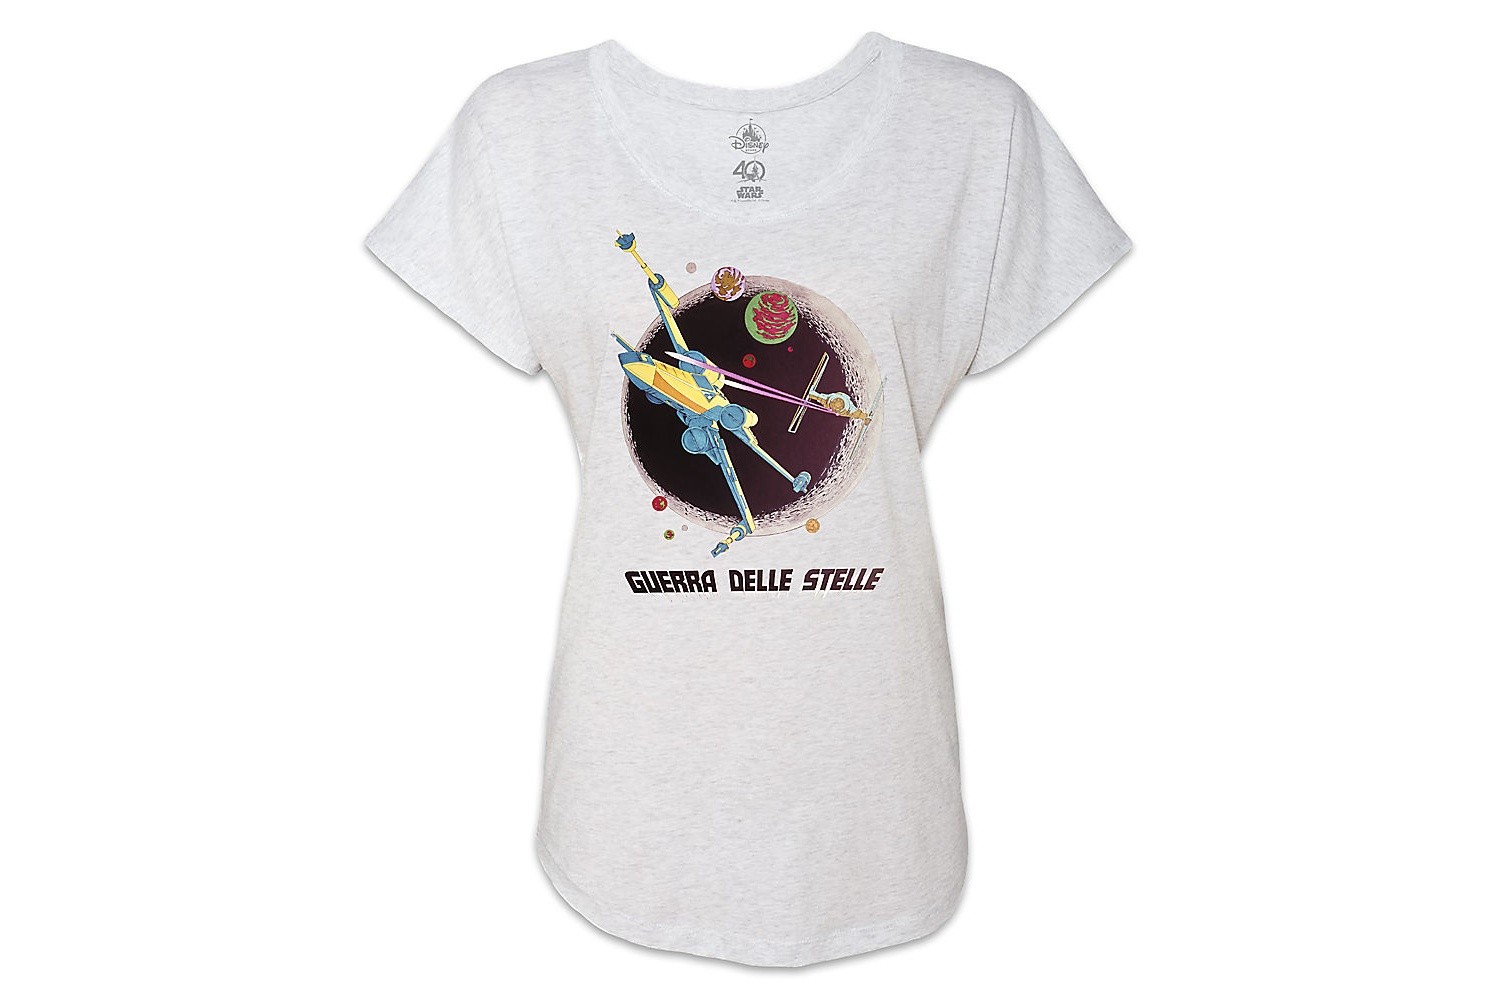 Women's Star Wars 40th Annivesary limited release t-shirt at the Disney Store